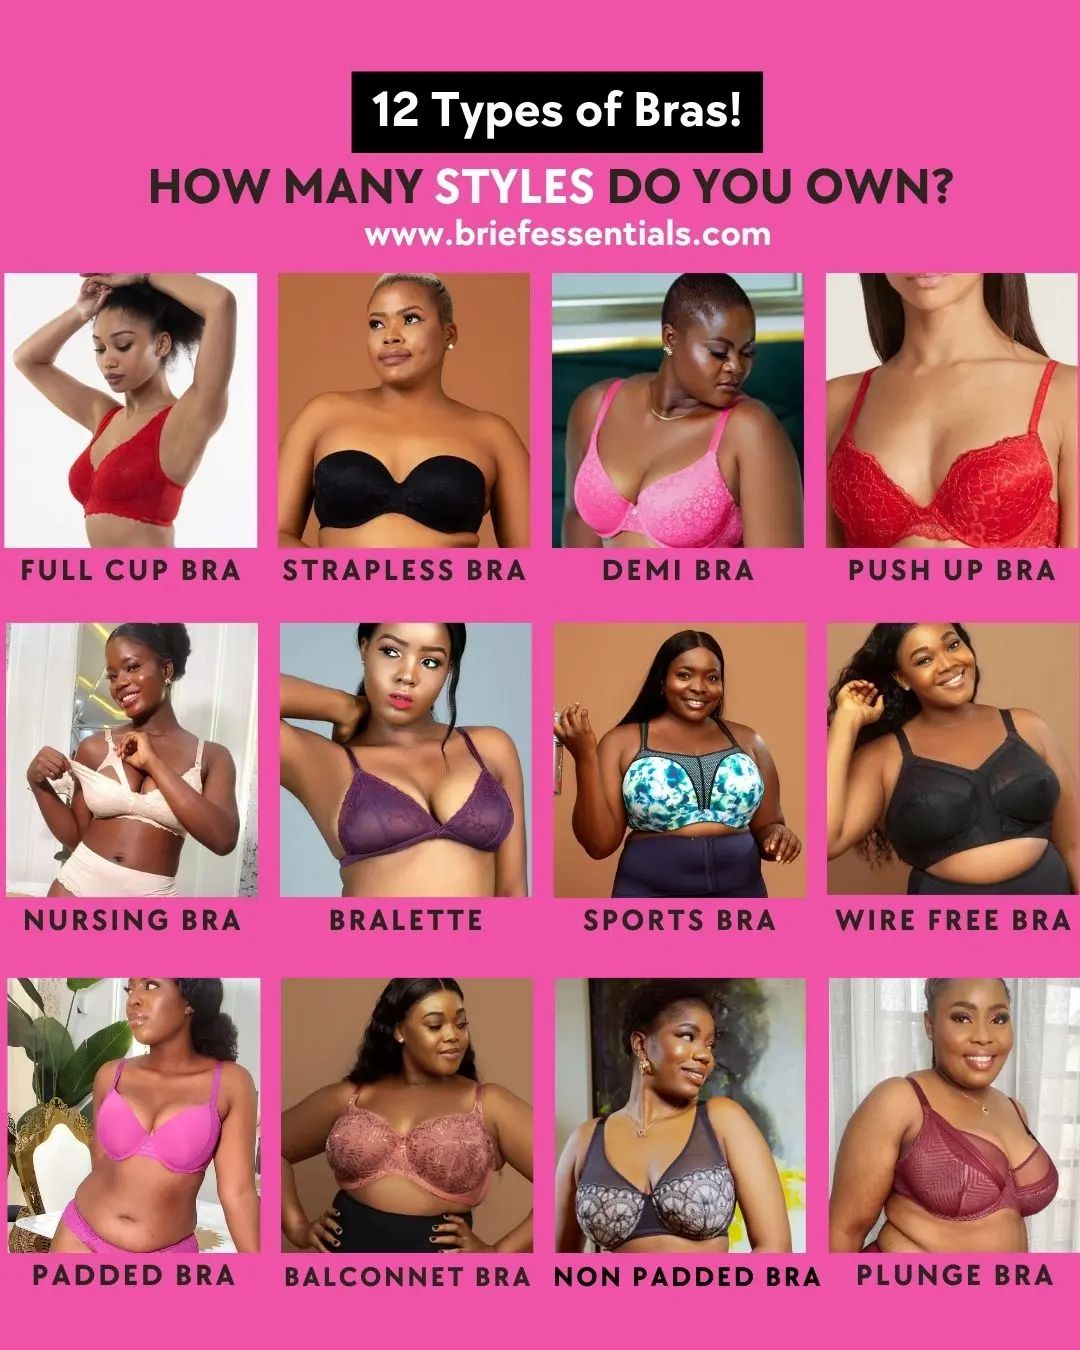 Does your bra actually fit? Read our 4 way test of a good fitting